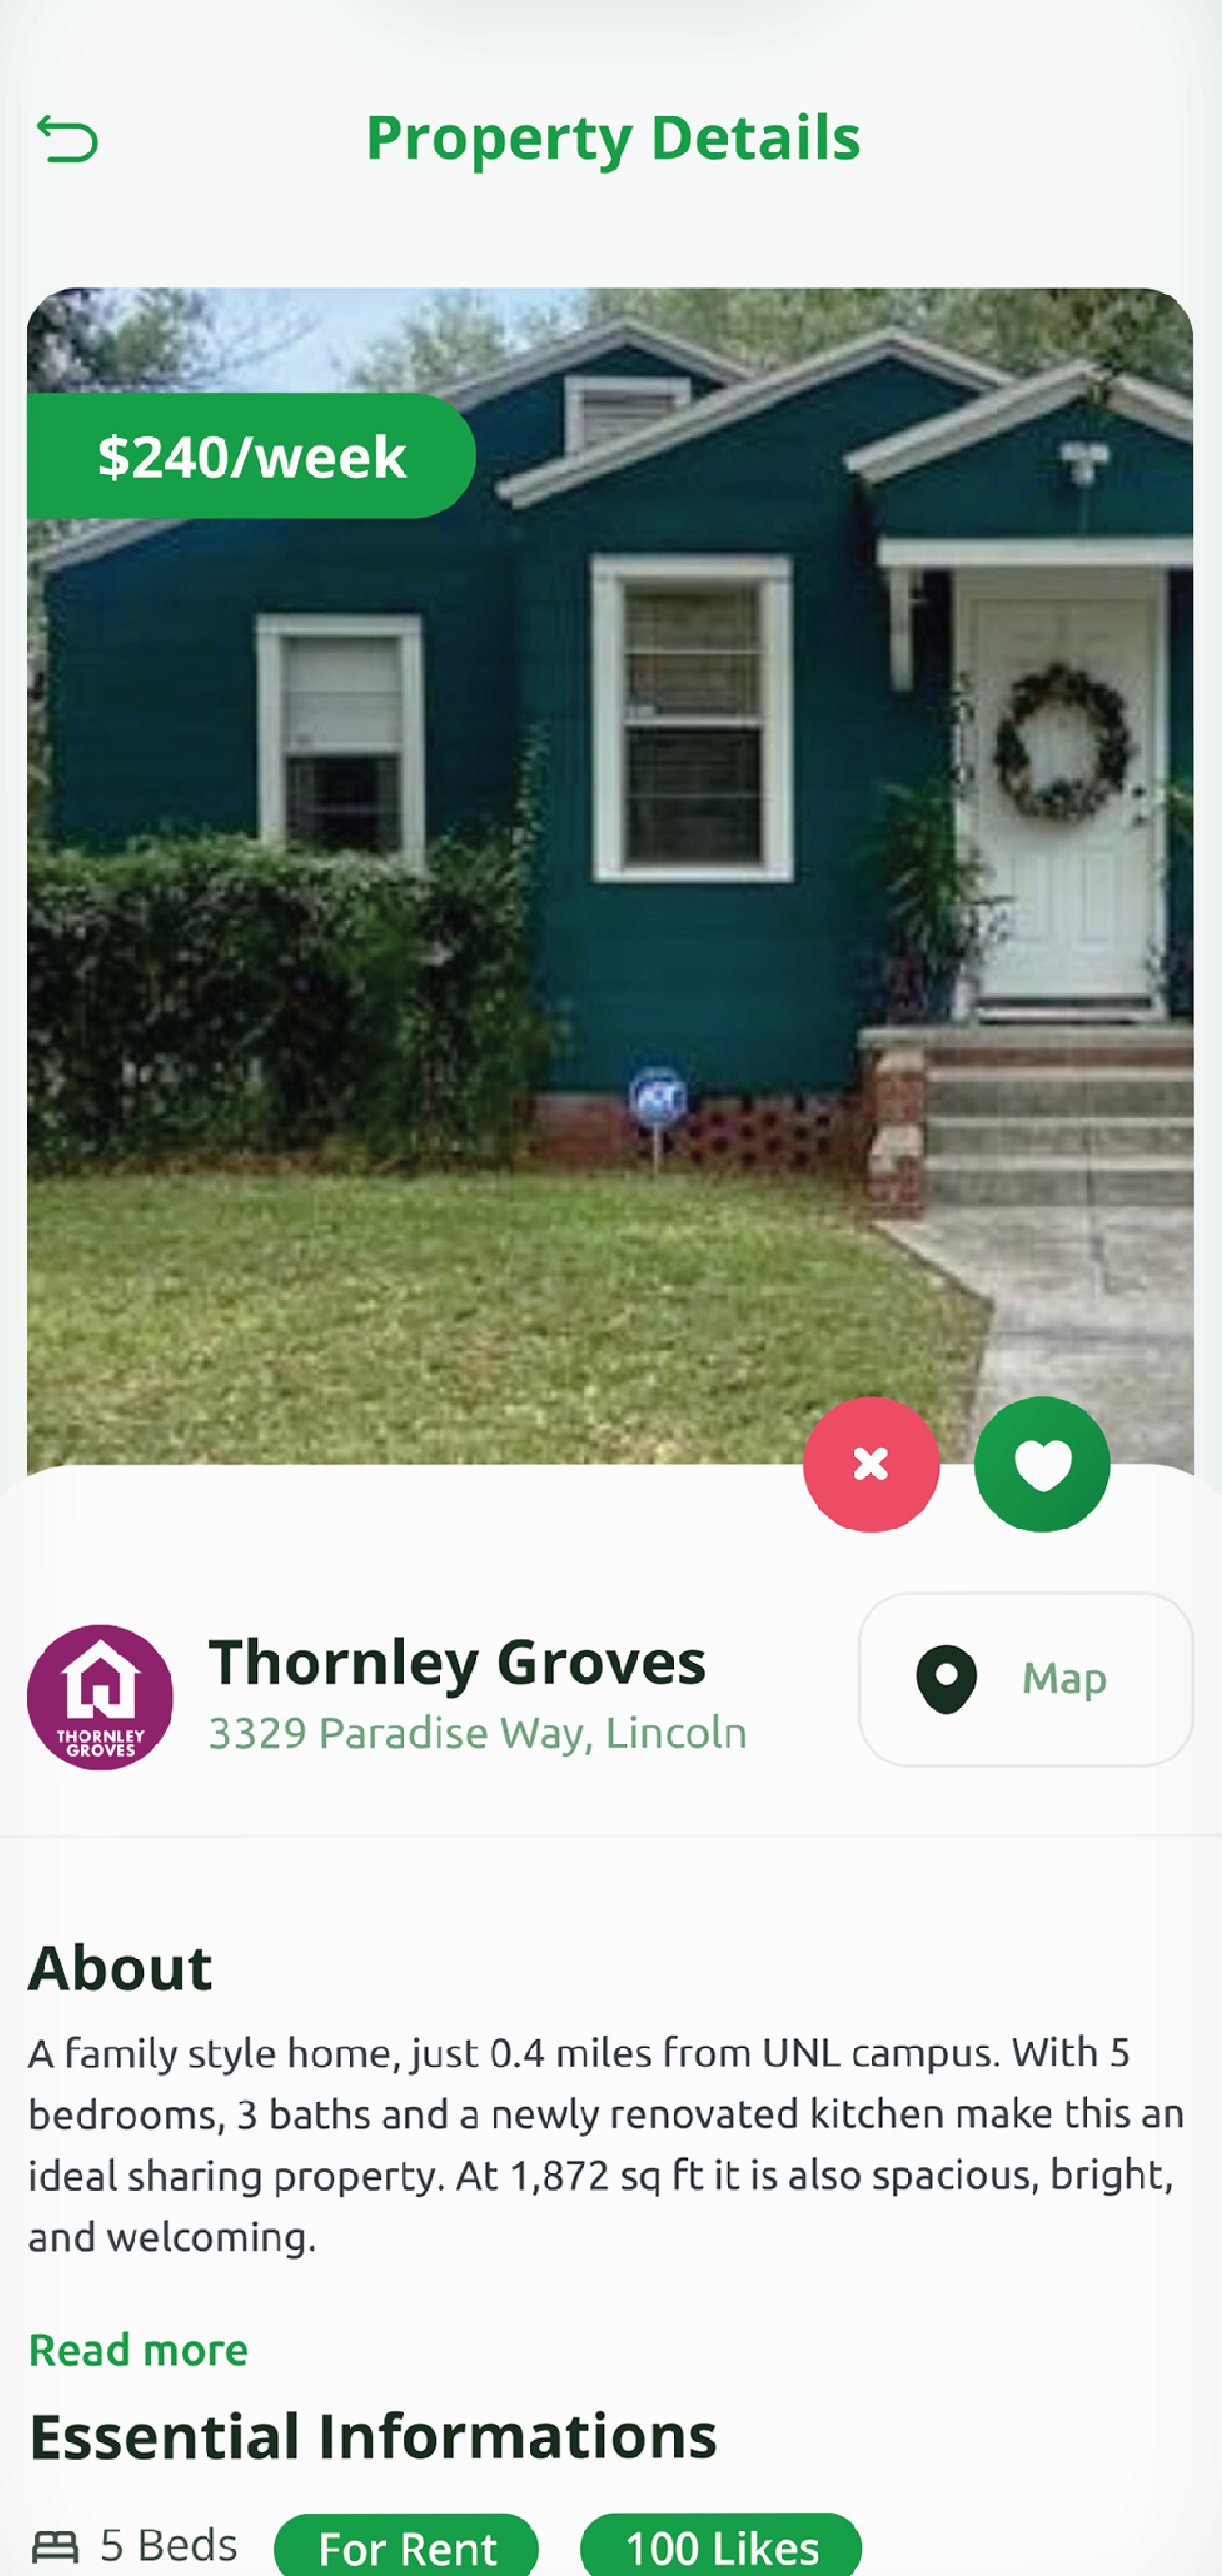 A picture of a blue house with a wreath on the front door.